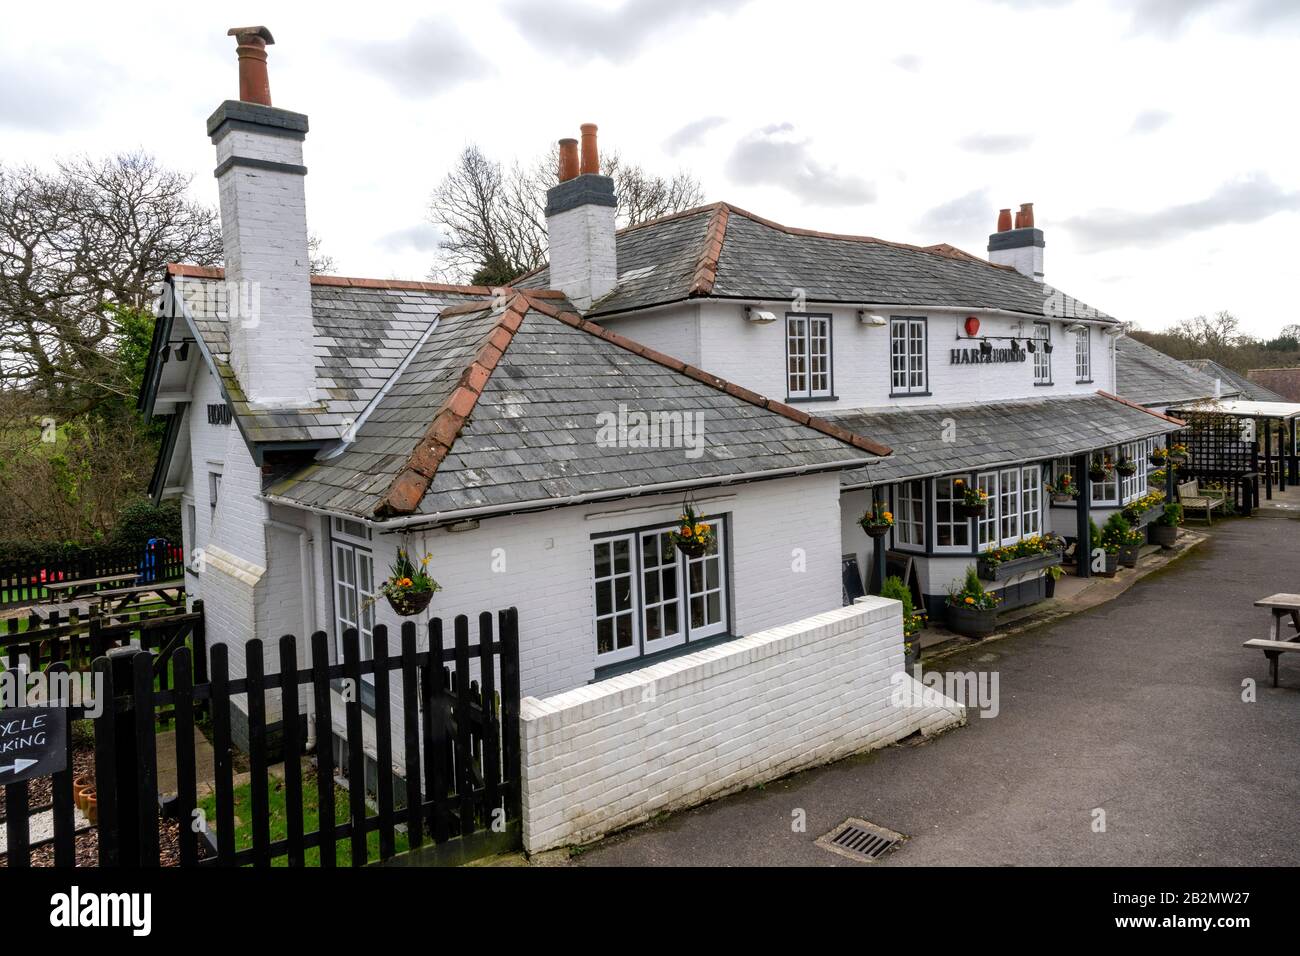 Hare and Hounds a Hall & Woodhouse Public House, Durnstown, Sway, New Forest, Brockenhurst, Hampshire, England, Großbritannien Stockfoto